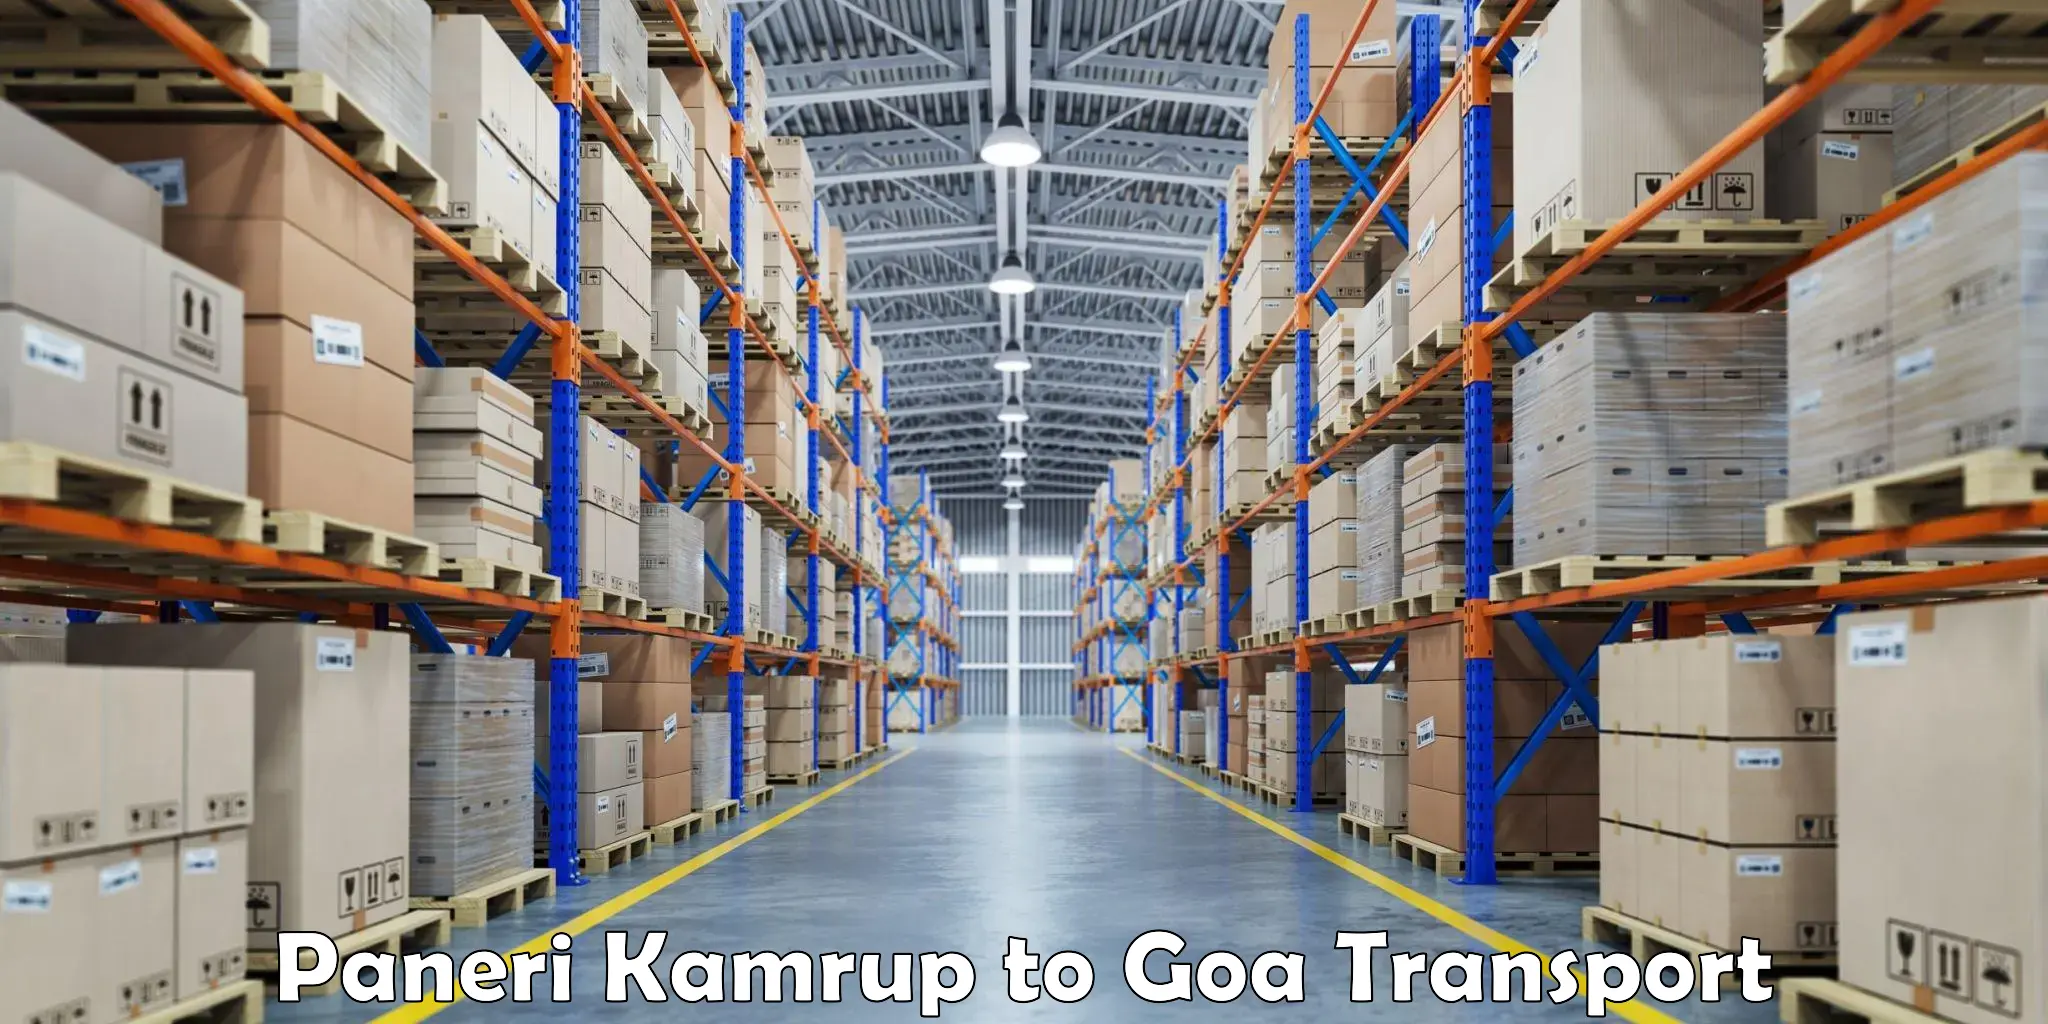 Transport bike from one state to another Paneri Kamrup to Goa